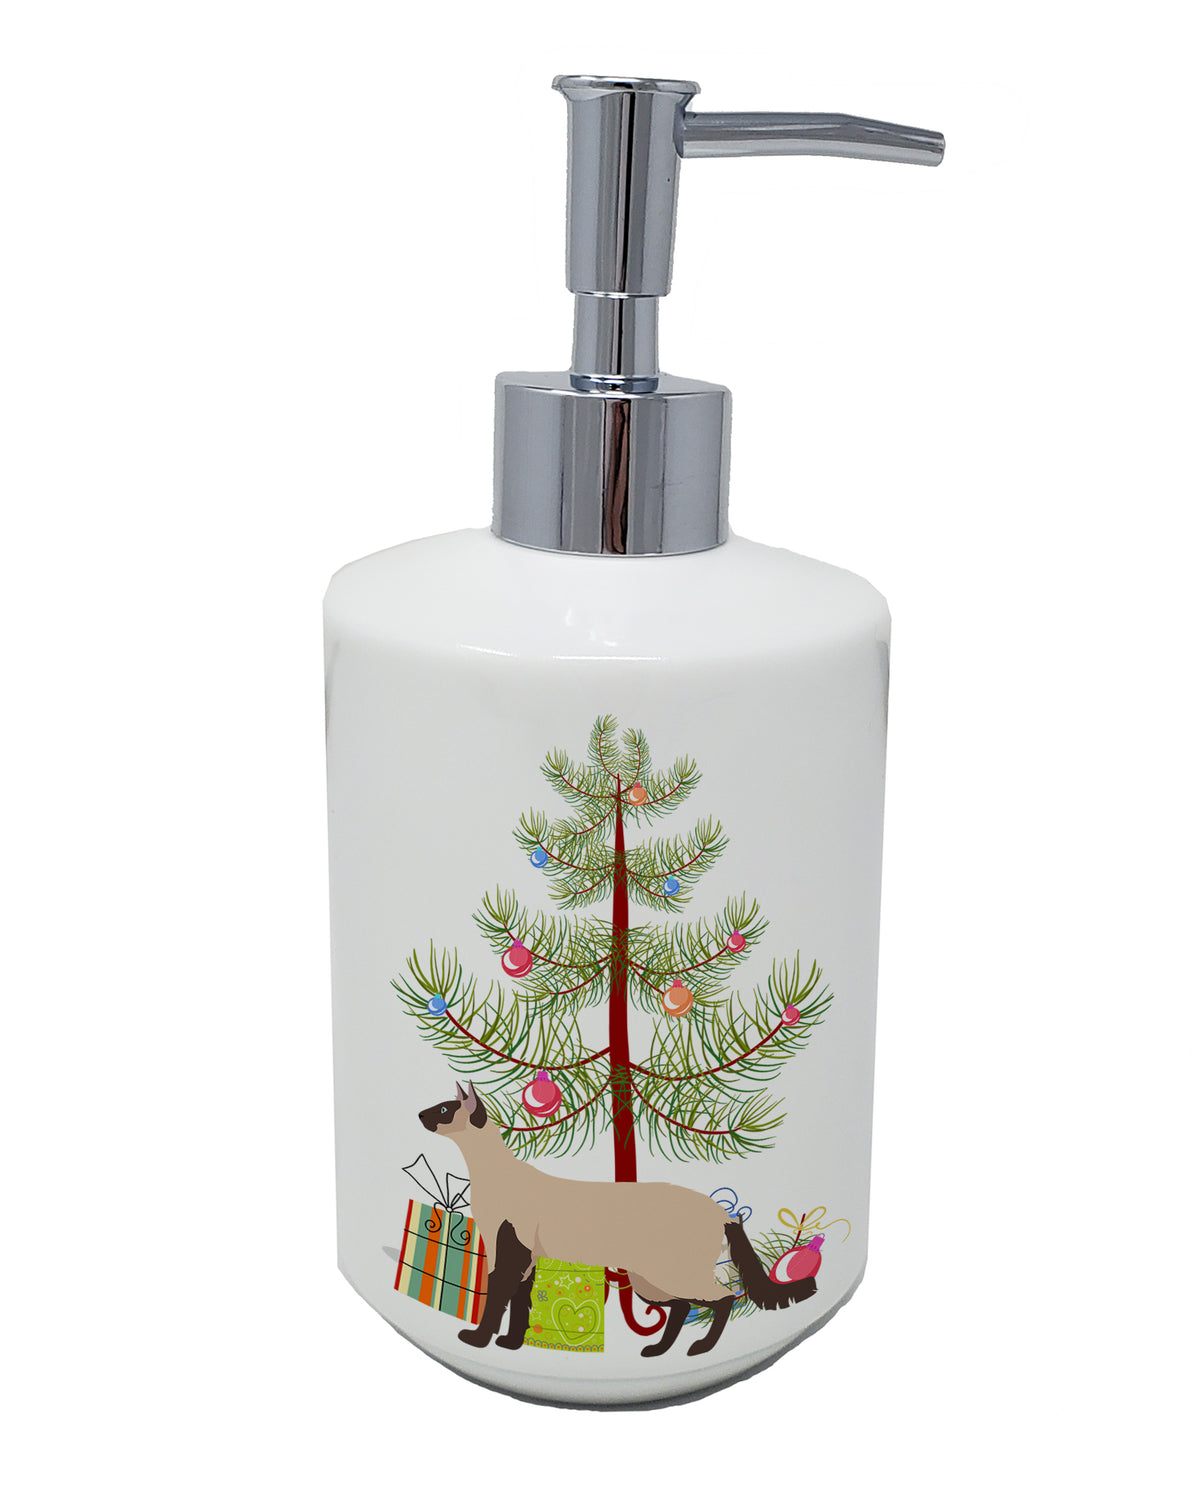 Buy this Colorpoint Longhair #3 Cat Merry Christmas Ceramic Soap Dispenser